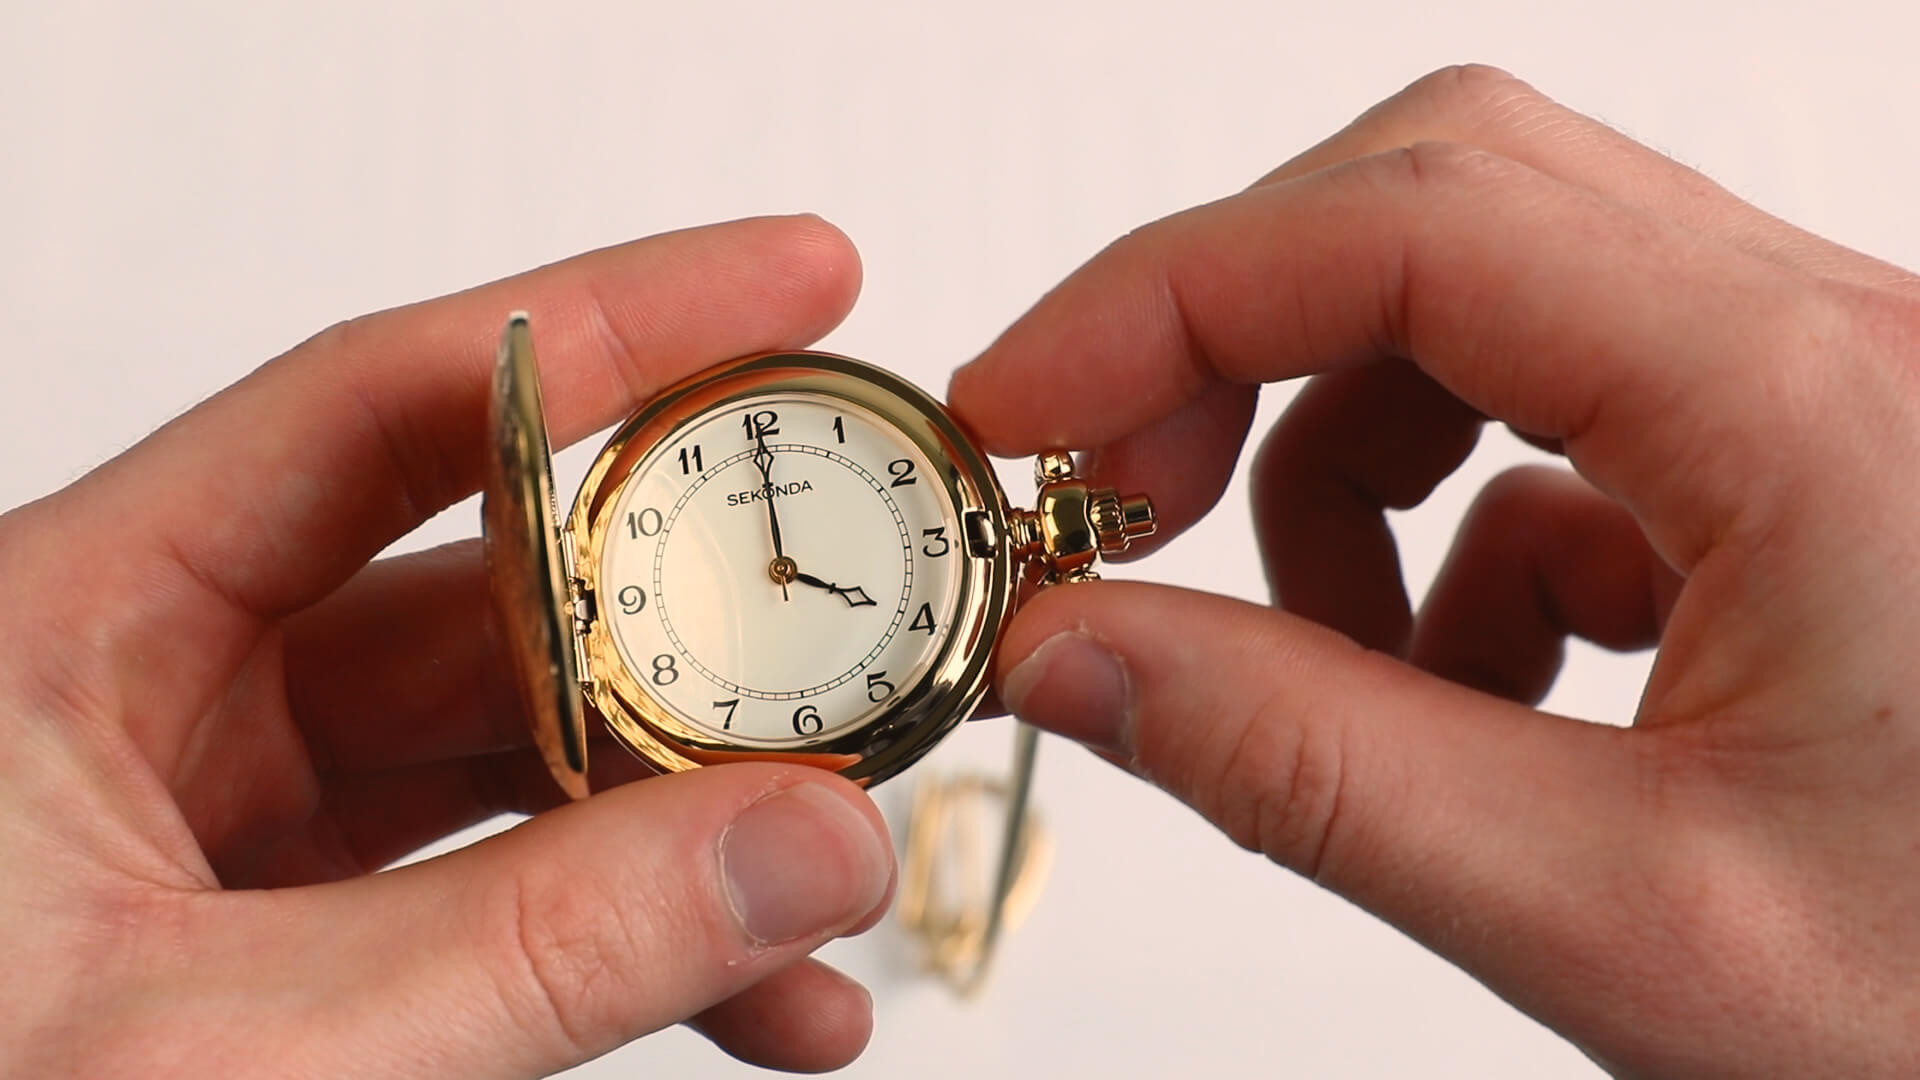 How To Change Time On A Pocket Watch